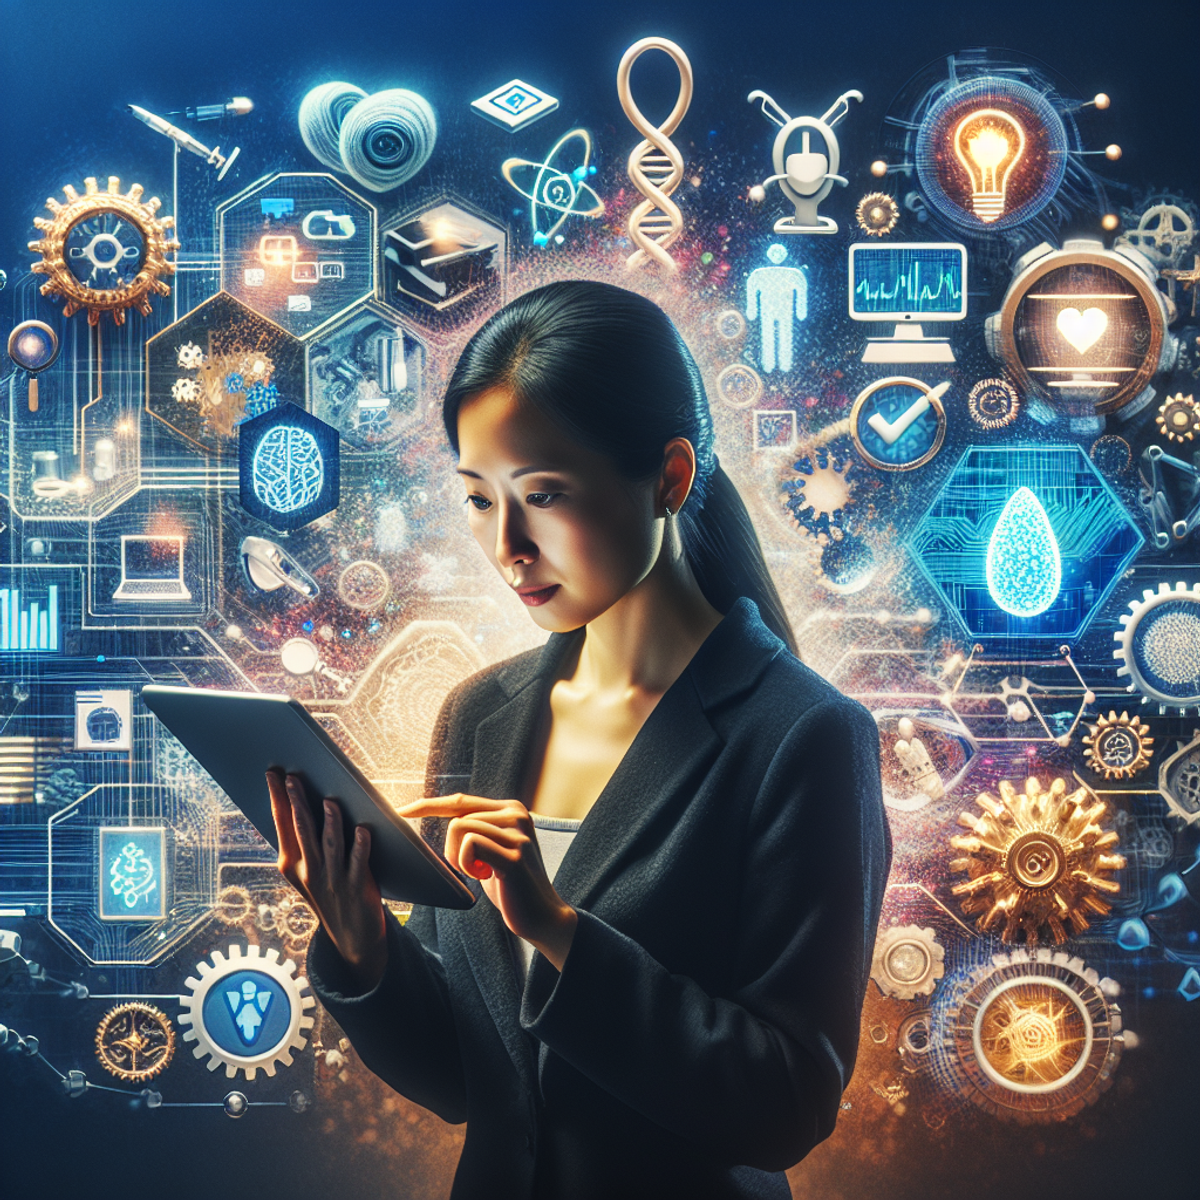 A woman with dark hair and glasses is working at a desk surrounded by symbols of technology, healthcare, and engineering. She is using an advanced AI-fueled device and appears deeply absorbed in her work.